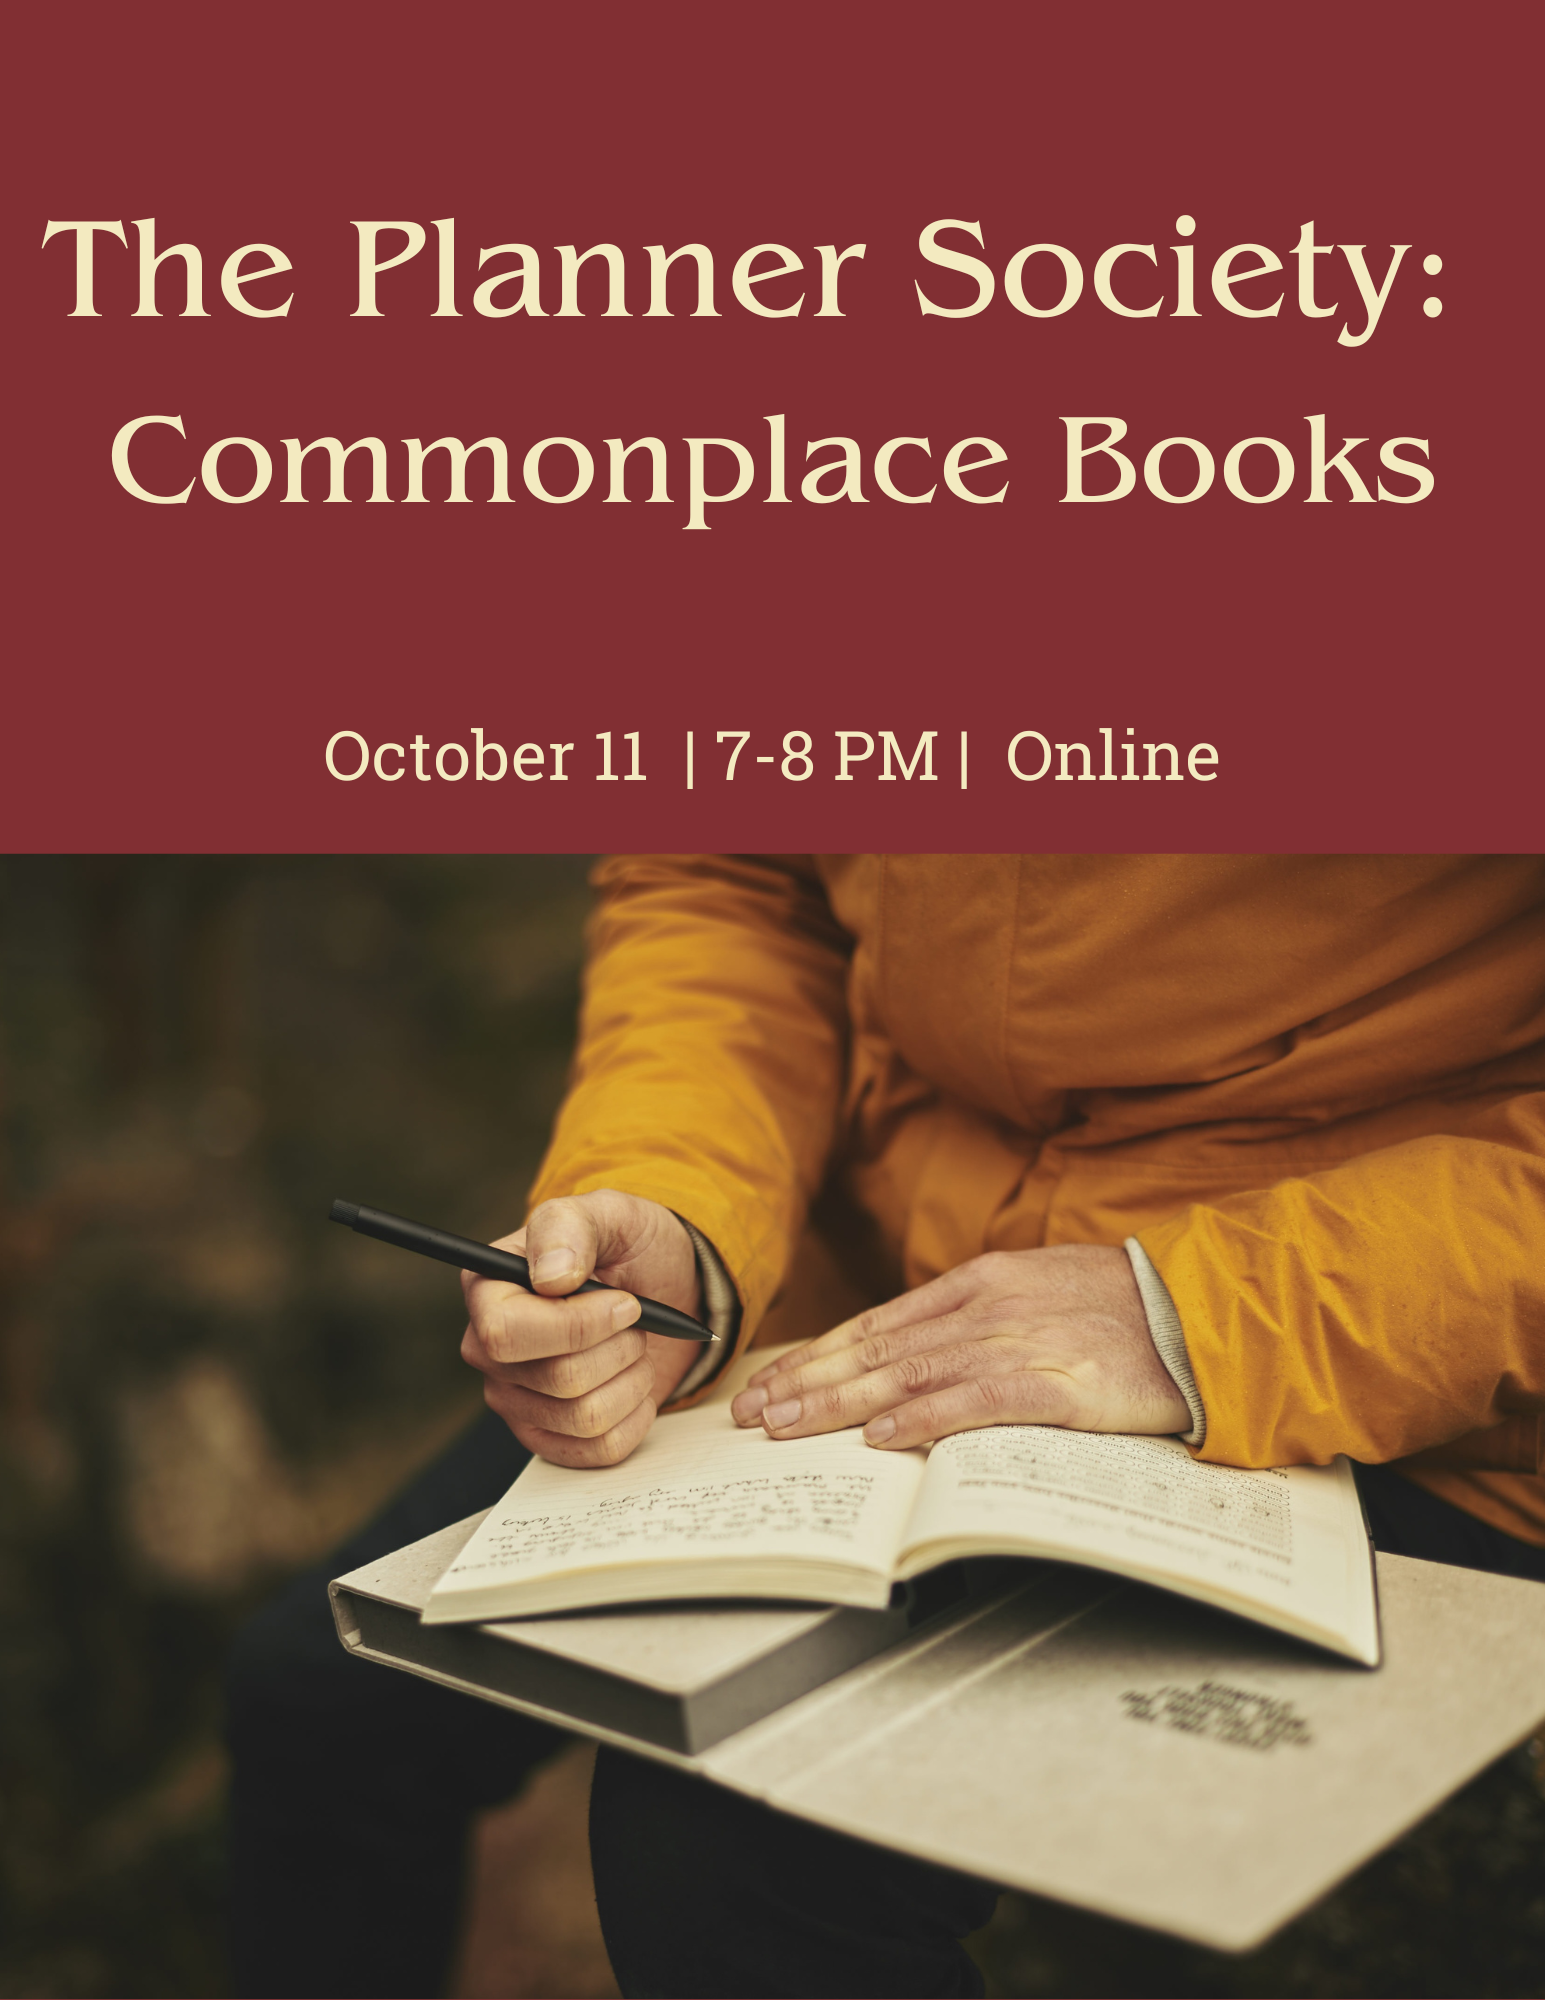 The Planner Society Commonplace Books person's hands holding journal and pen writing